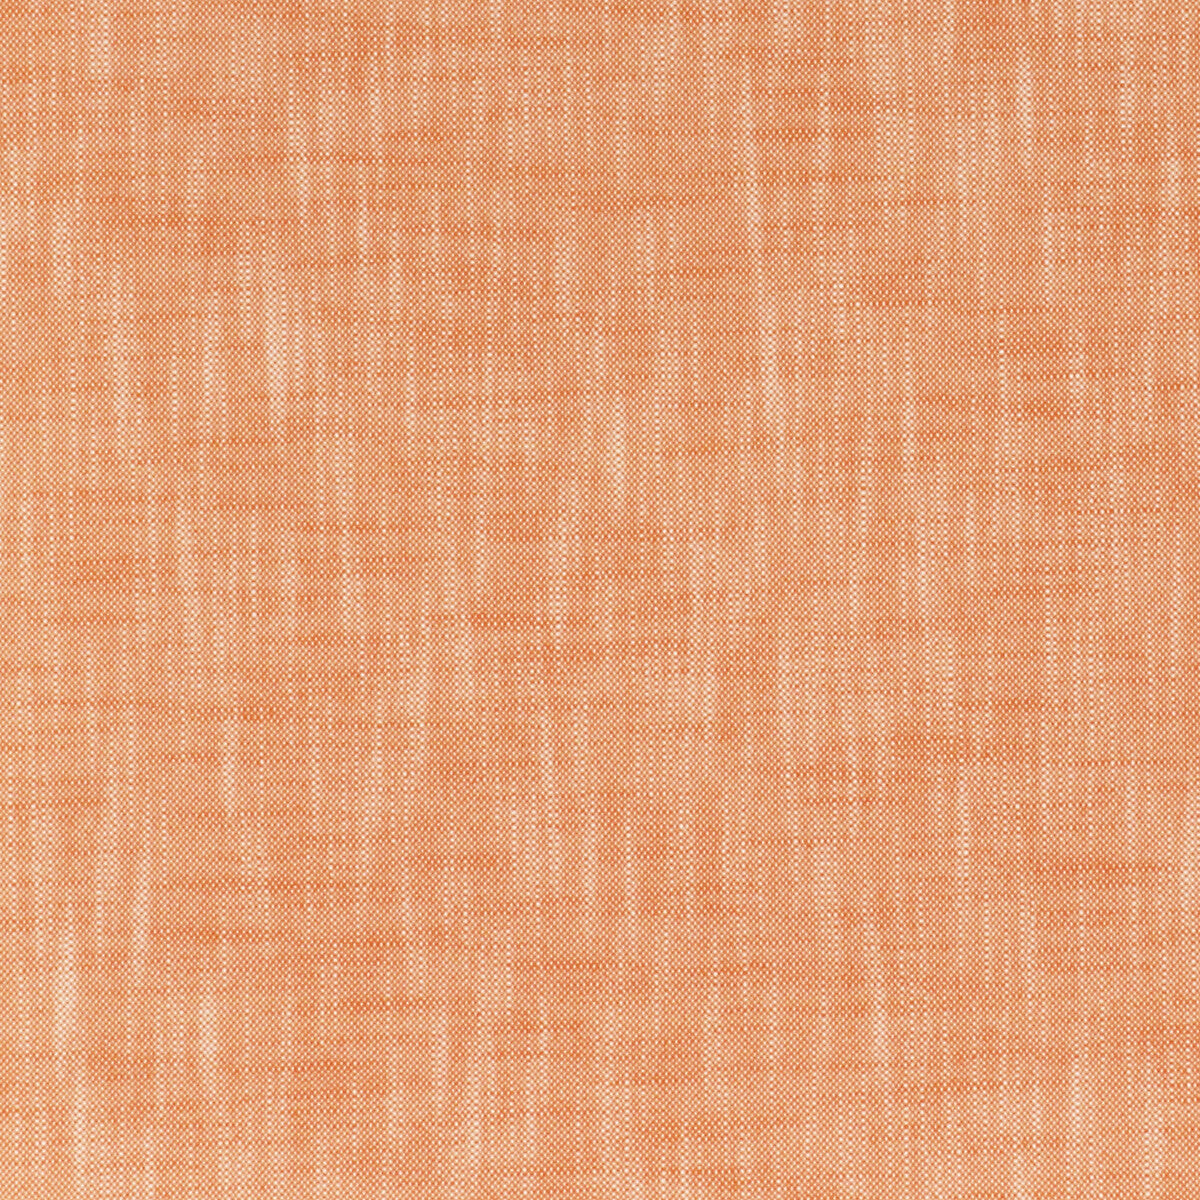 Kravet Smart fabric in 35517-12 color - pattern 35517.12.0 - by Kravet Smart in the Inside Out Performance Fabrics collection